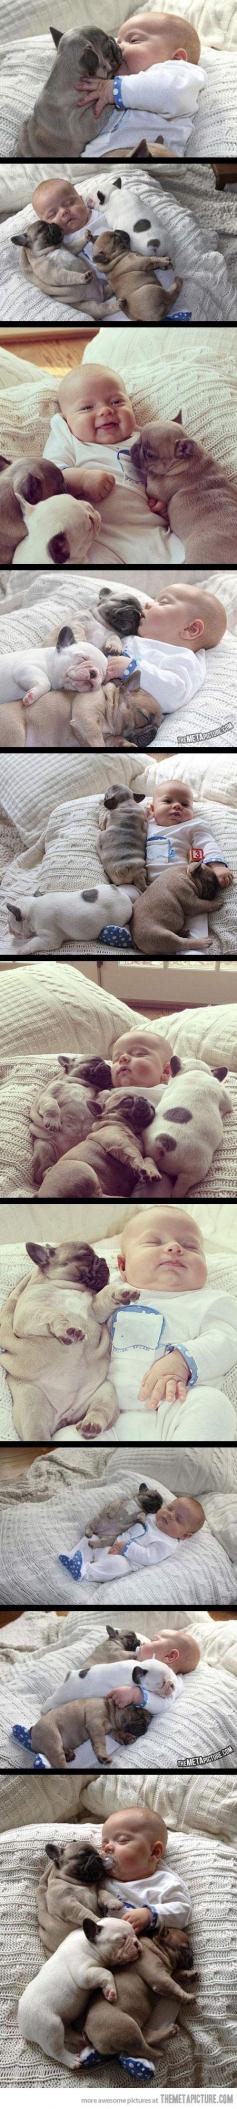 cute babies and french bulldog puppies. Cutest thing I've ever seen! :'D